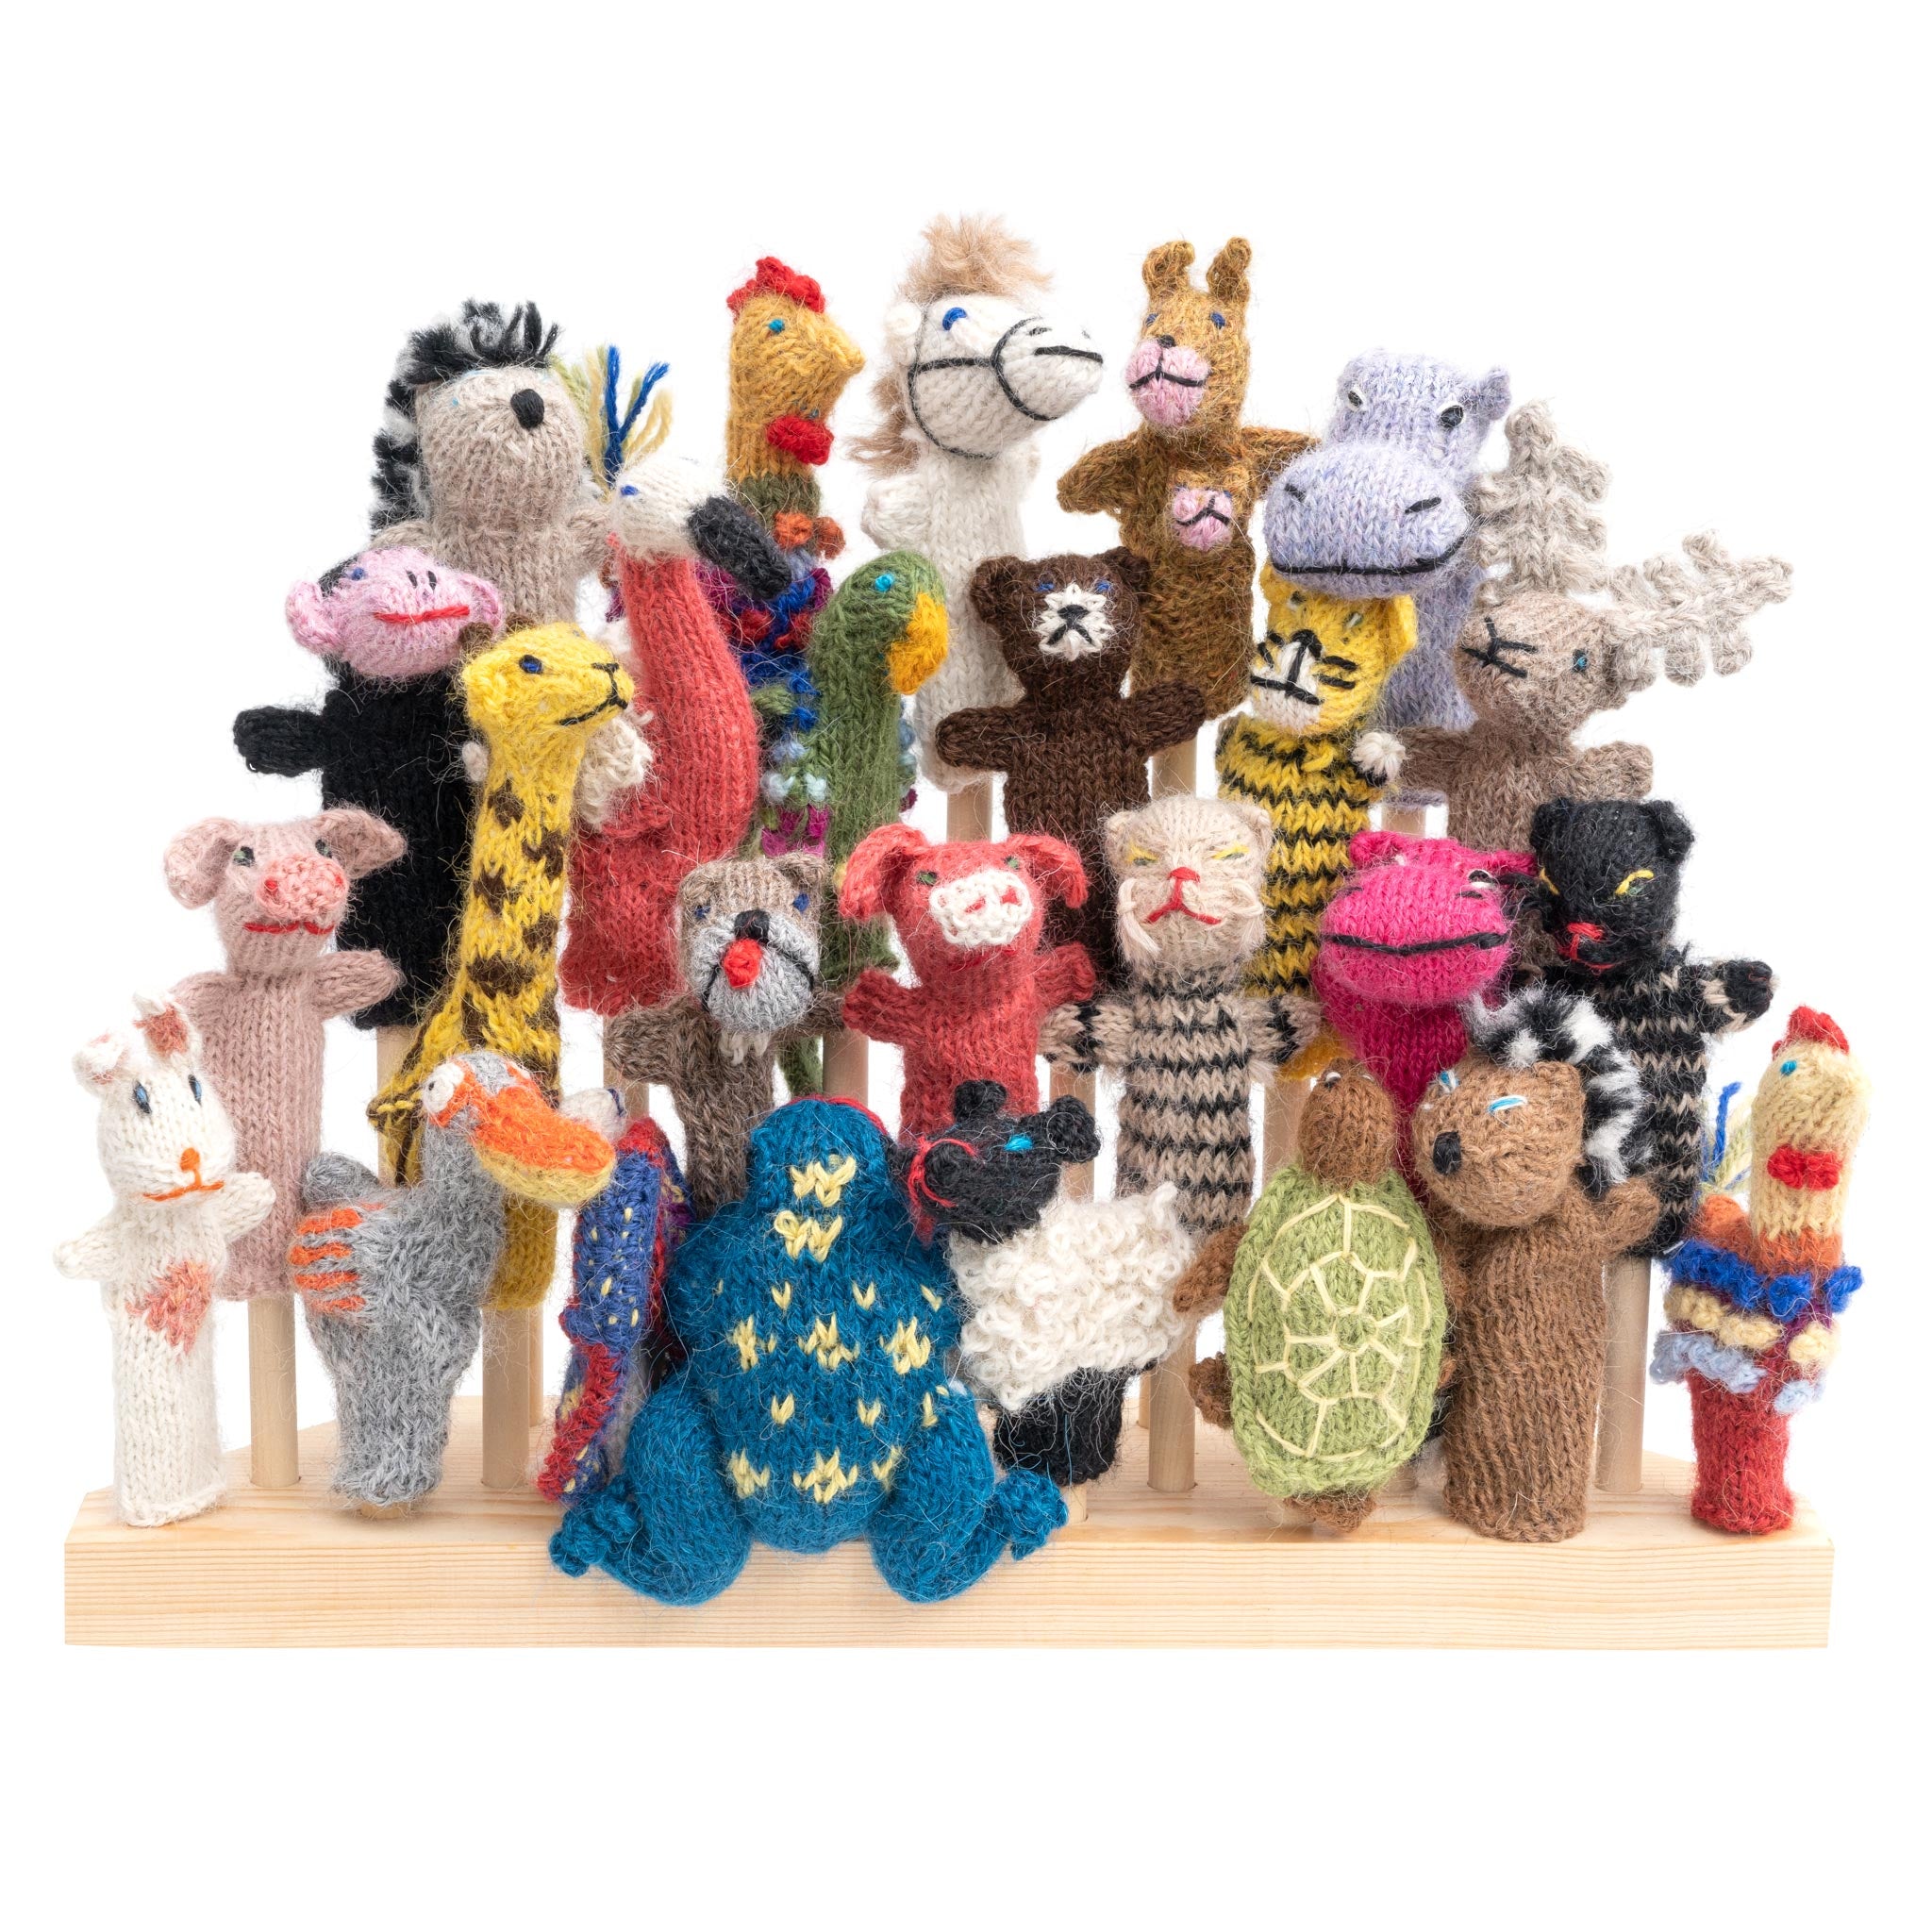 The Puppet Company (US) wholesale products